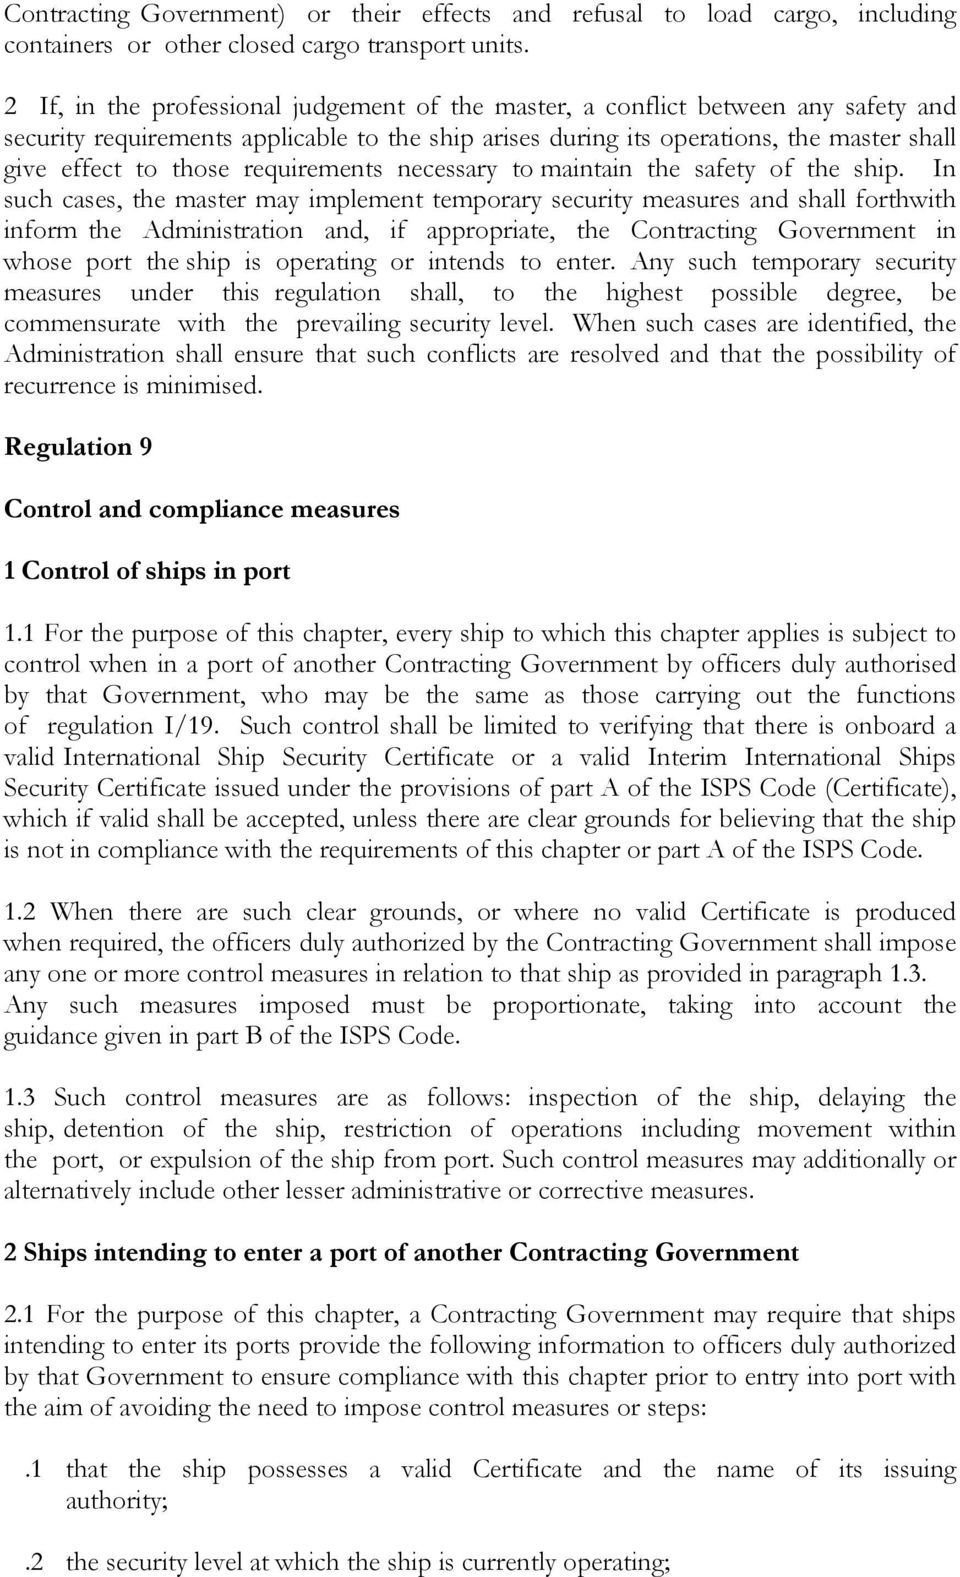 requirements necessary to maintain the safety of the ship.